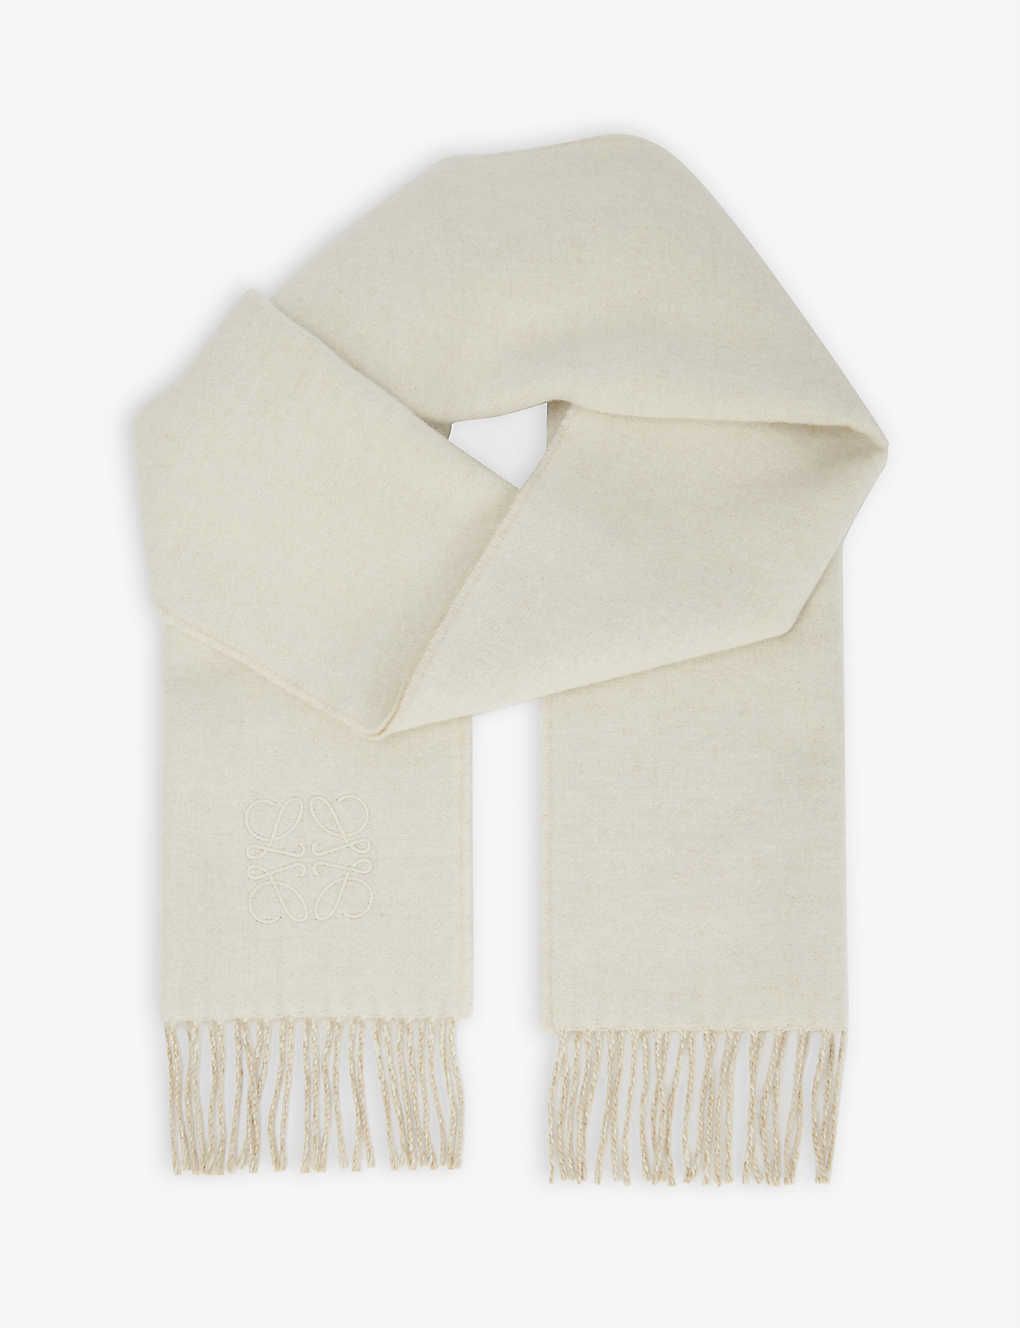 Anagram-embroidered wool and cashmere-blend scarf | Selfridges